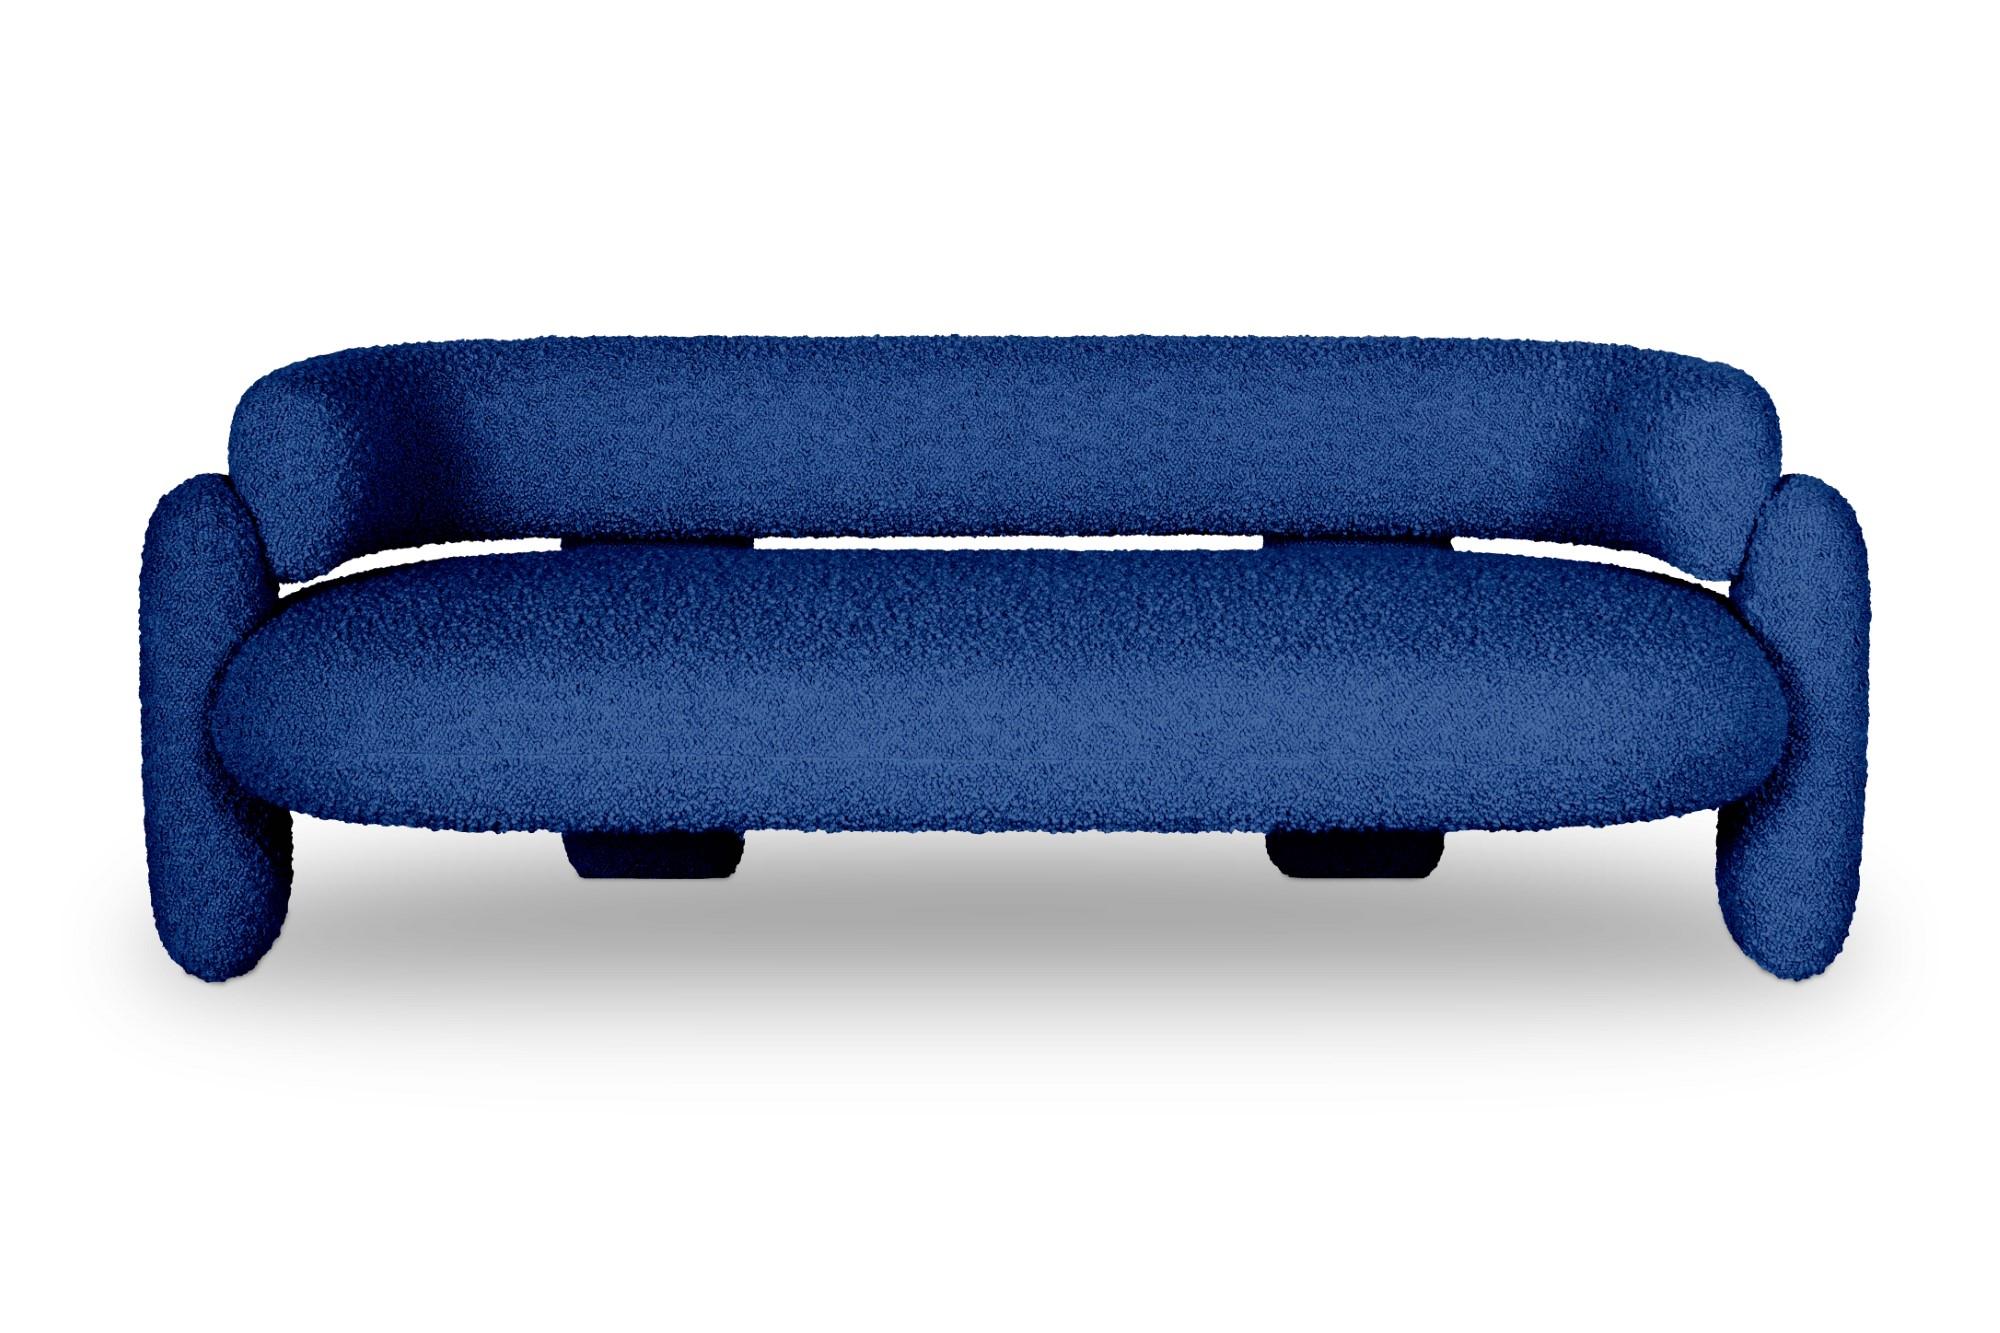 Embrace cormo cobalt sofa by Royal Stranger
Dimensions: W 200 x H 70 x D 90 cm. Seat height 47 cm.
Materials: solid wood frame, foam, upholstery.
Available in other Royal Stranger’s fabrics and in COM. 

Embrace sofa is fond of neat lines. It